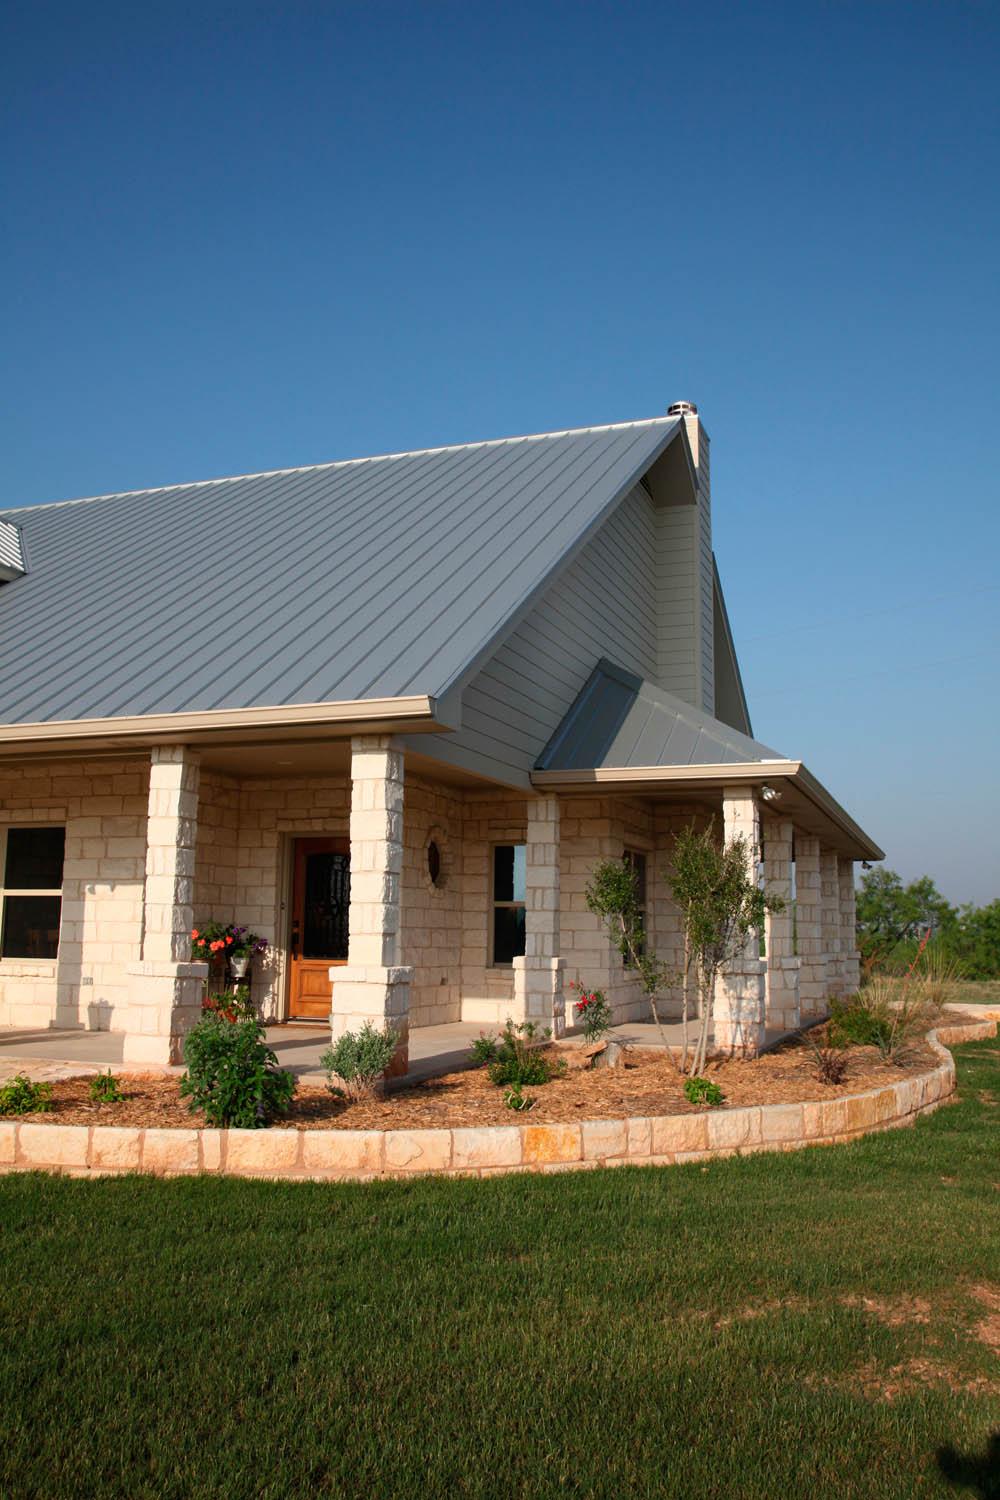 Silver Metallic_1 - Silver Metallic 1 - Mueller, Inc What Colors Go With A Silver Metal Roof